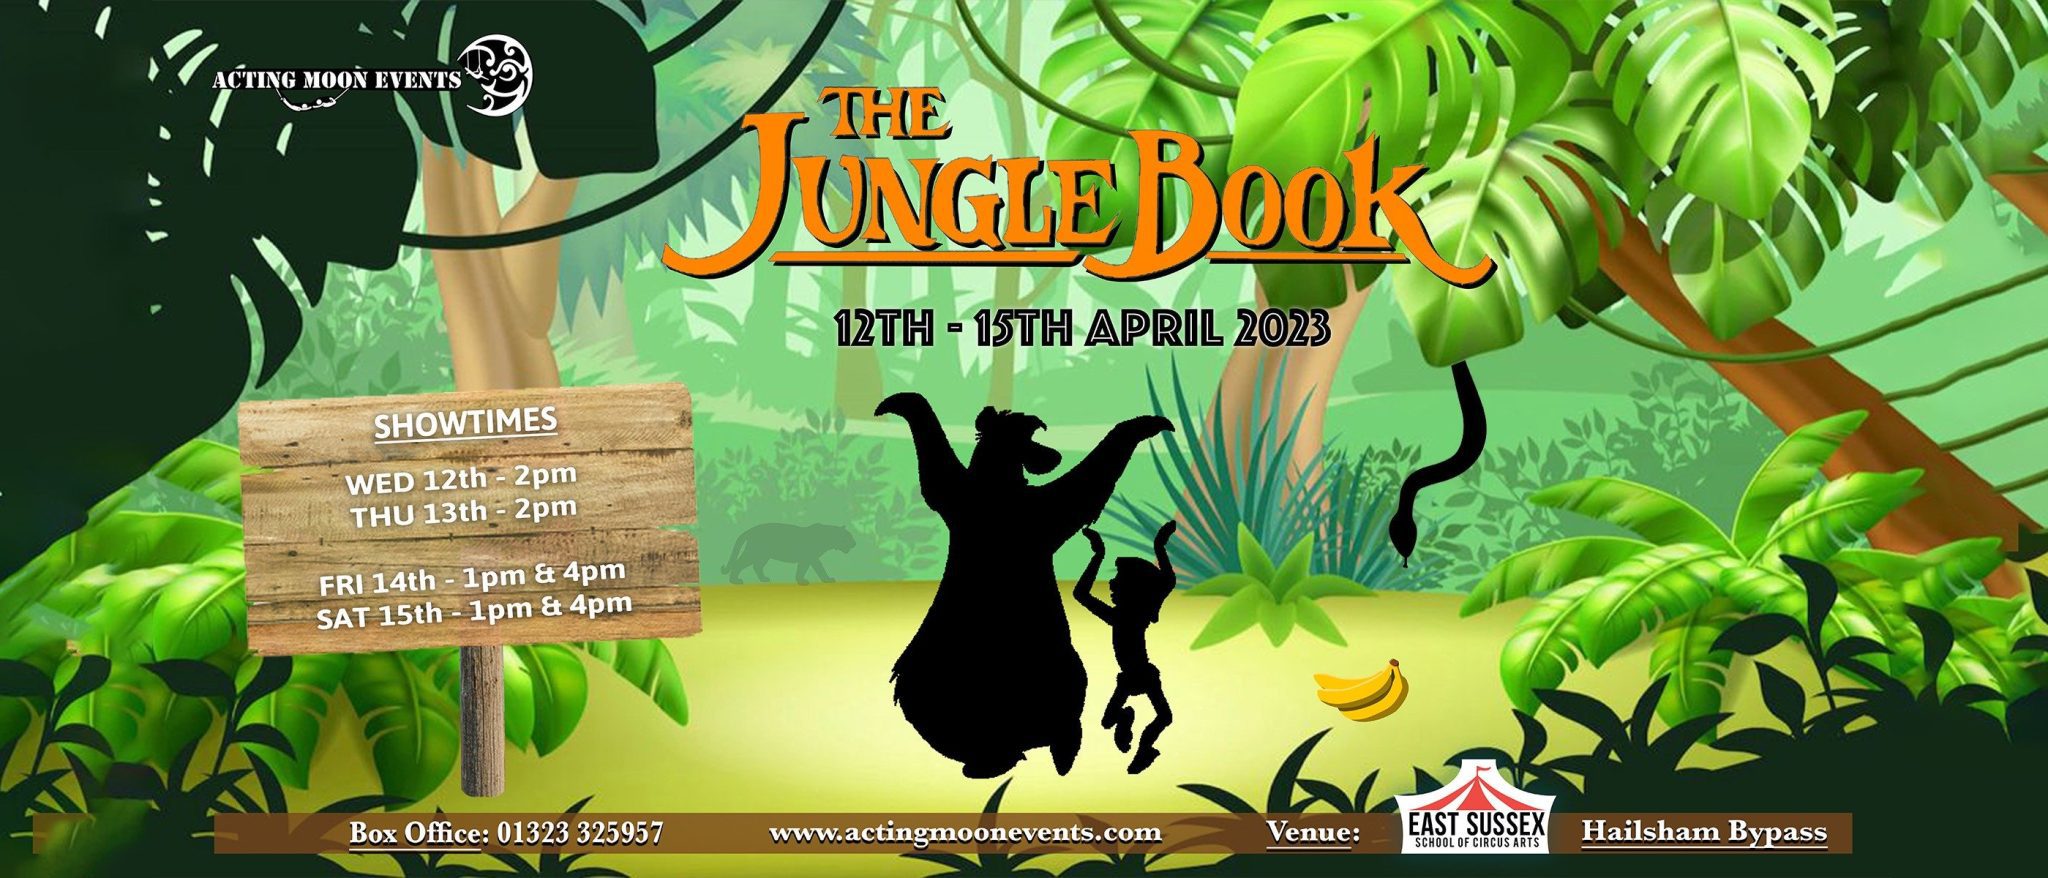 The Jungle Book - What's on in Hailsham